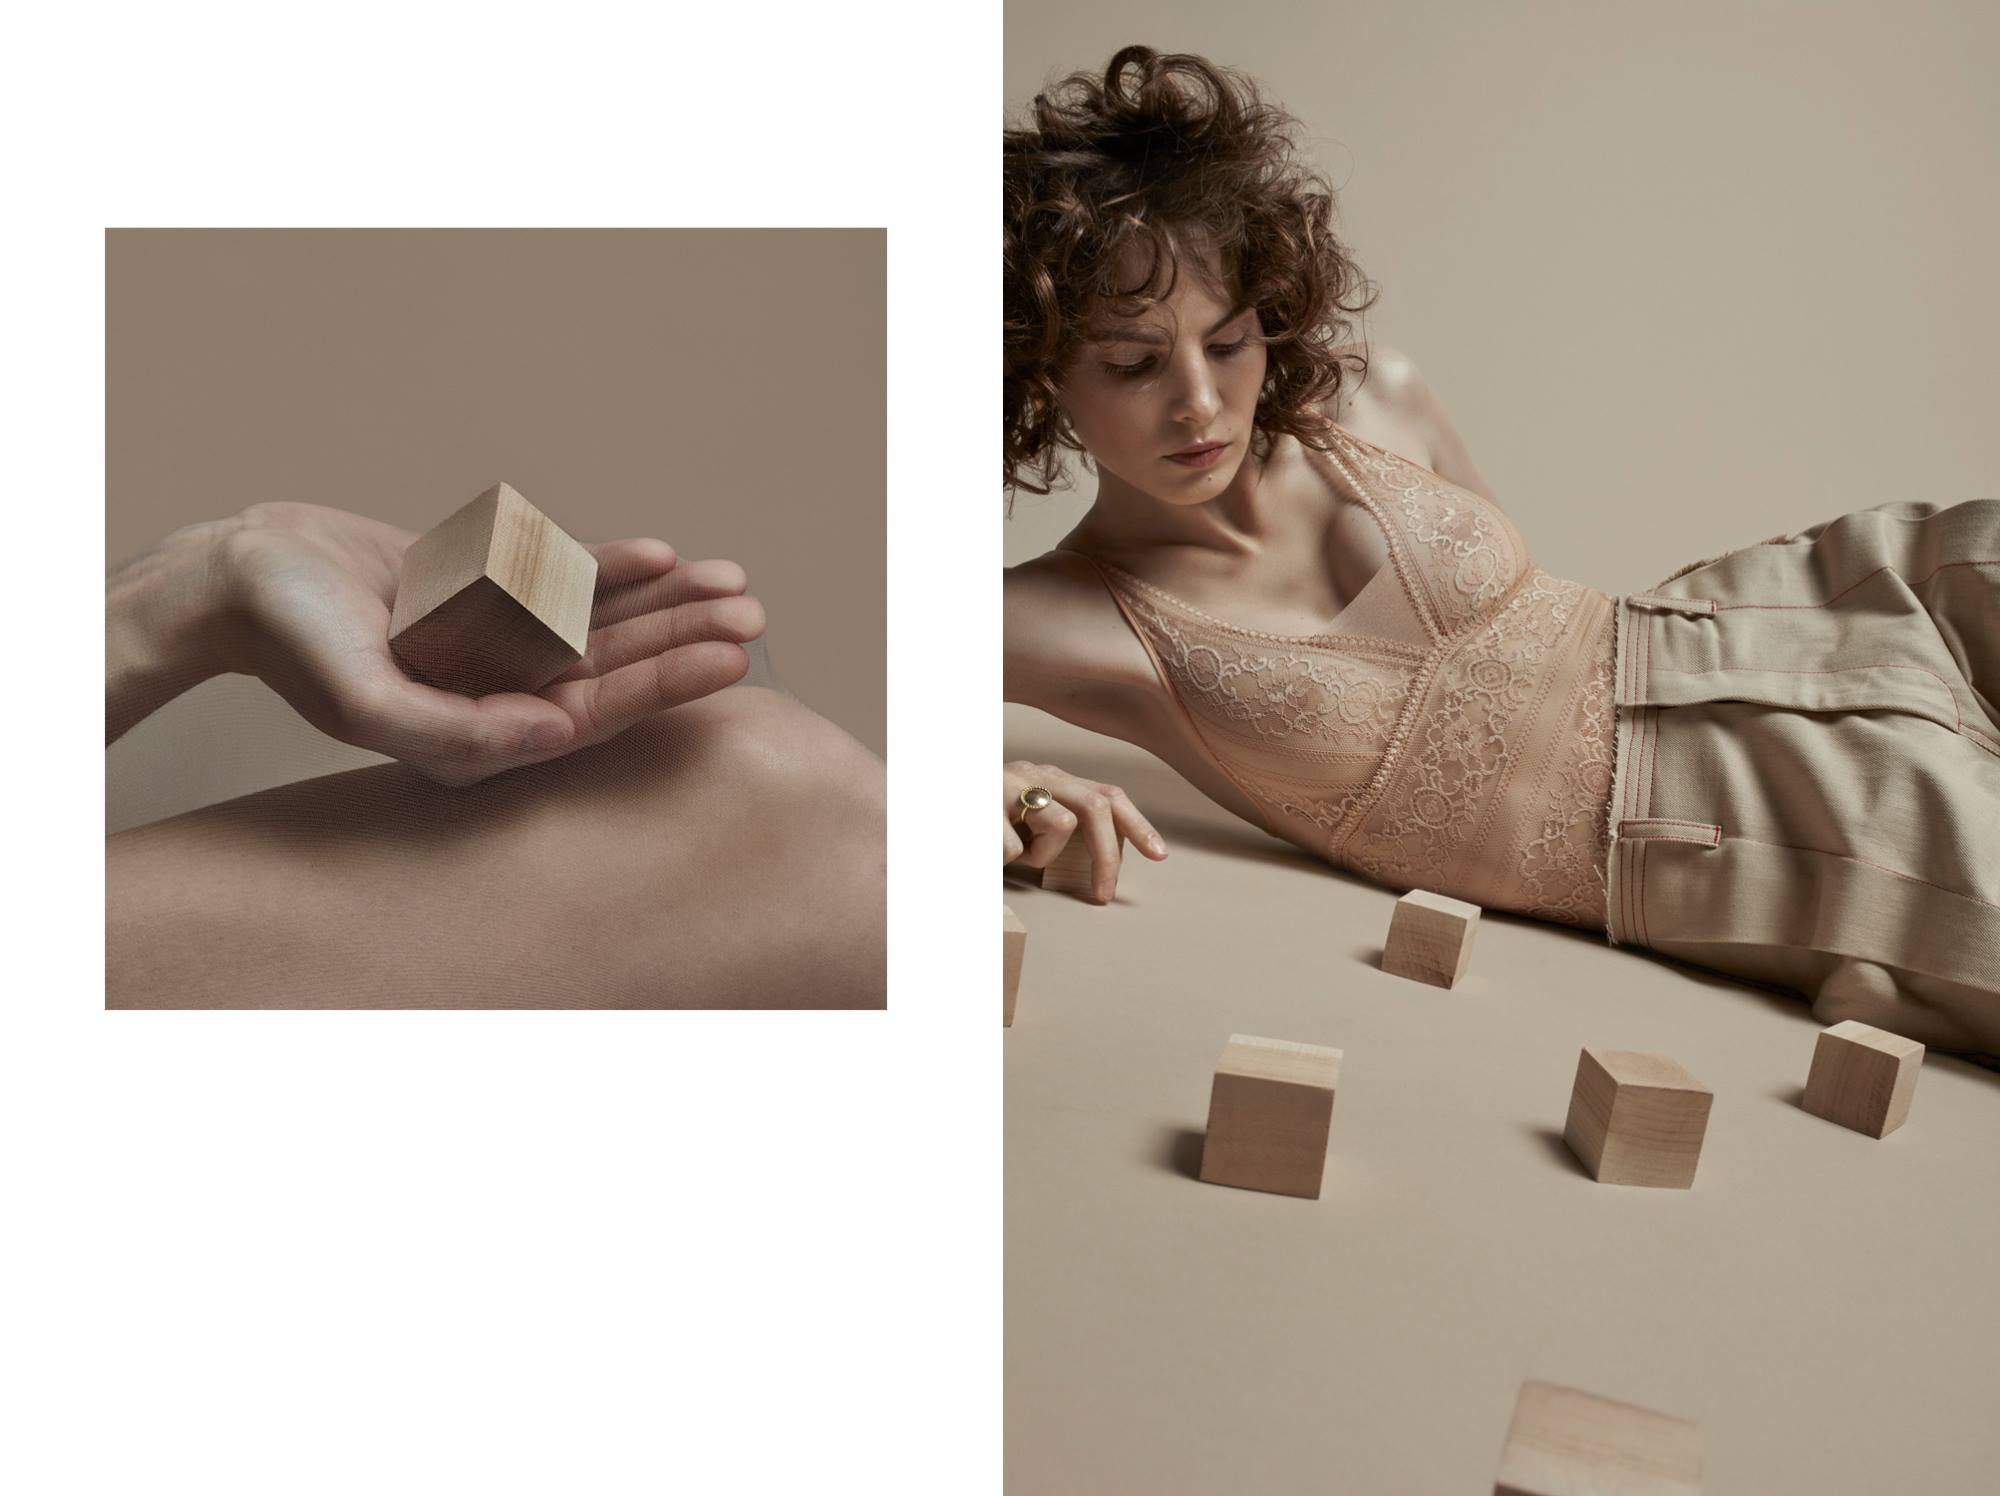 EDTORIAL: Be/ge styled by KAS KRYST for Schön! Magazine